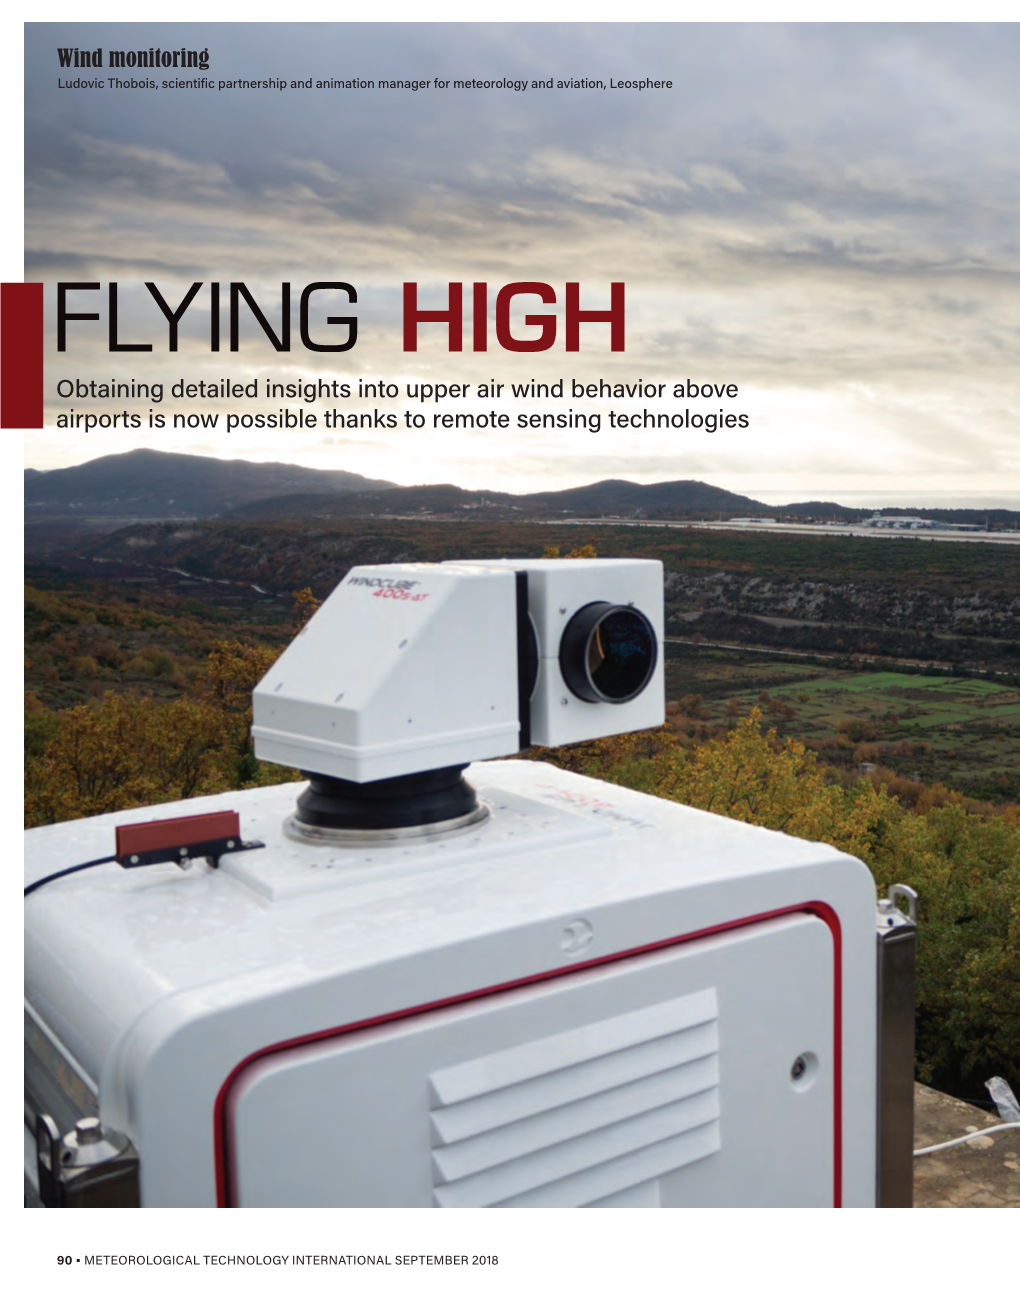 FLYING HIGH Obtaining Detailed Insights Into Upper Air Wind Behavior Above Airports Is Now Possible Thanks to Remote Sensing Technologies